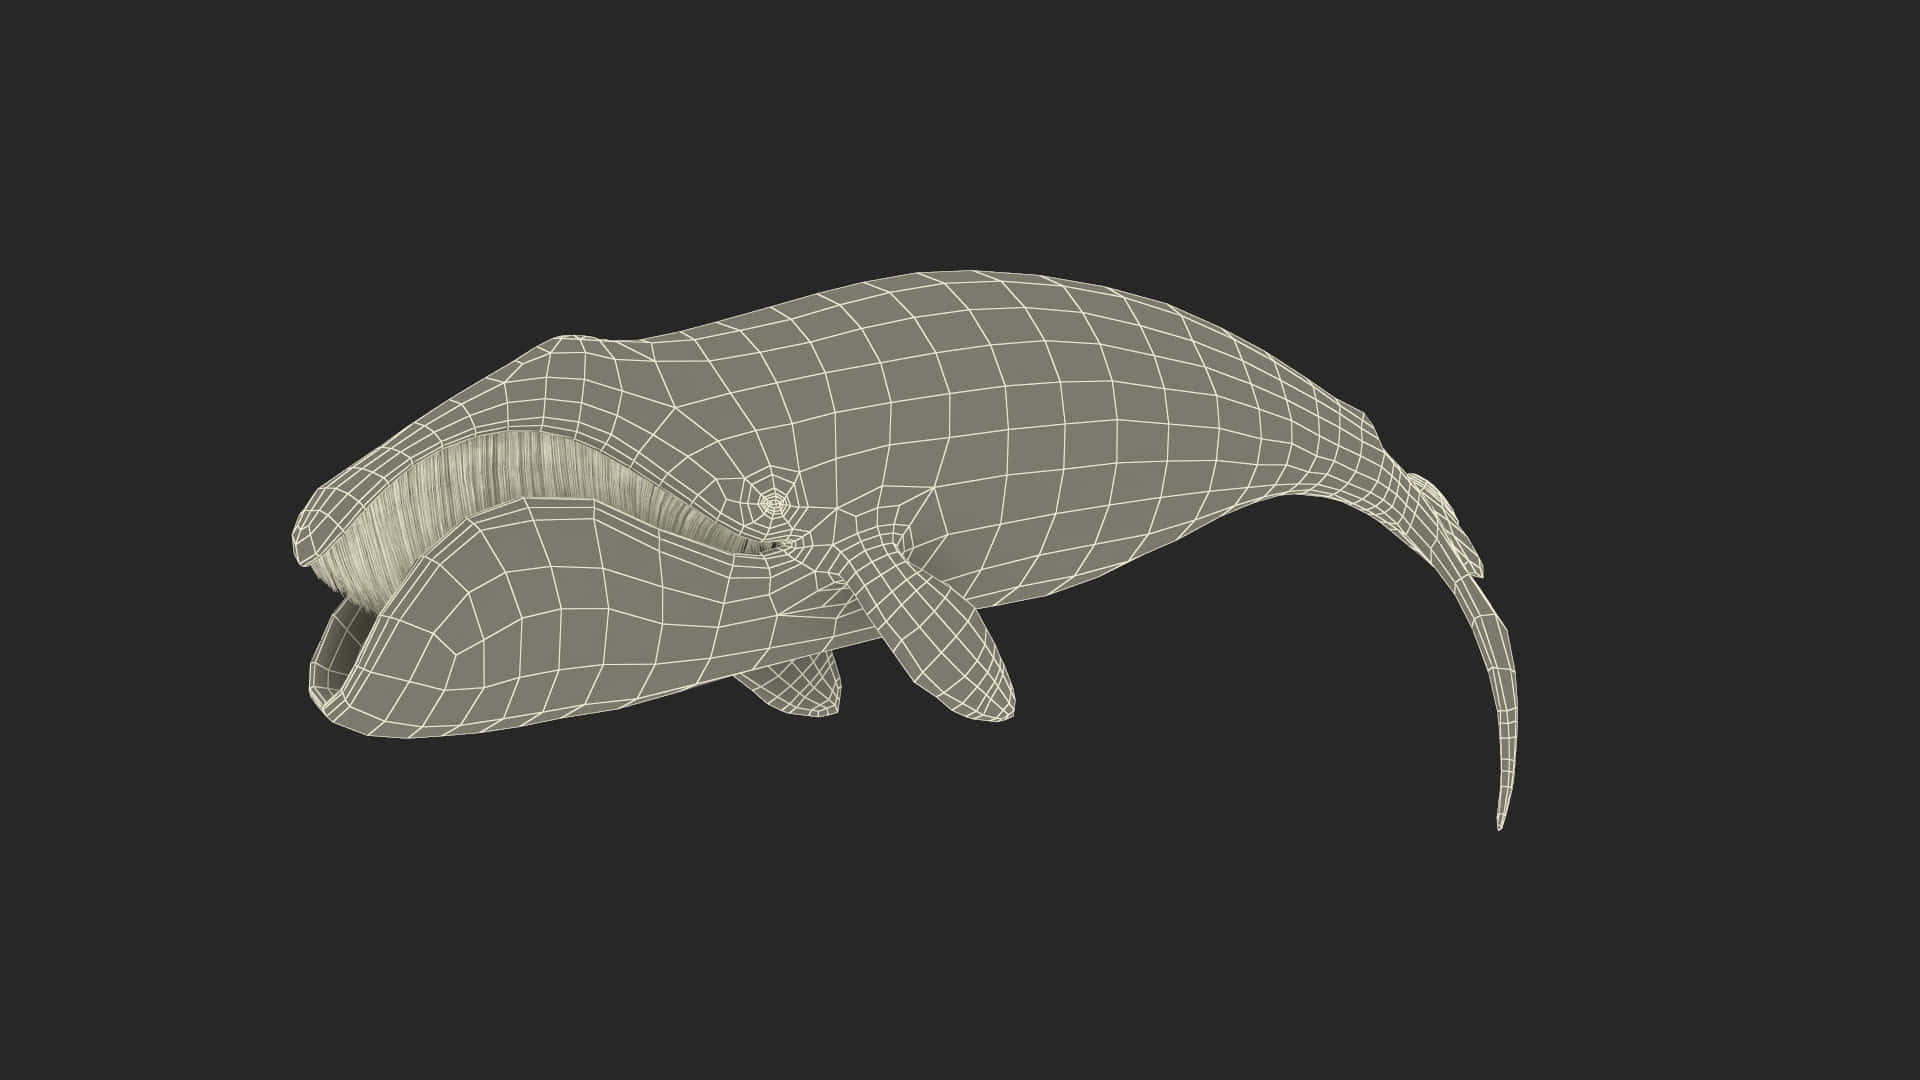 Bowhead Whale Wireframe Model Wallpaper